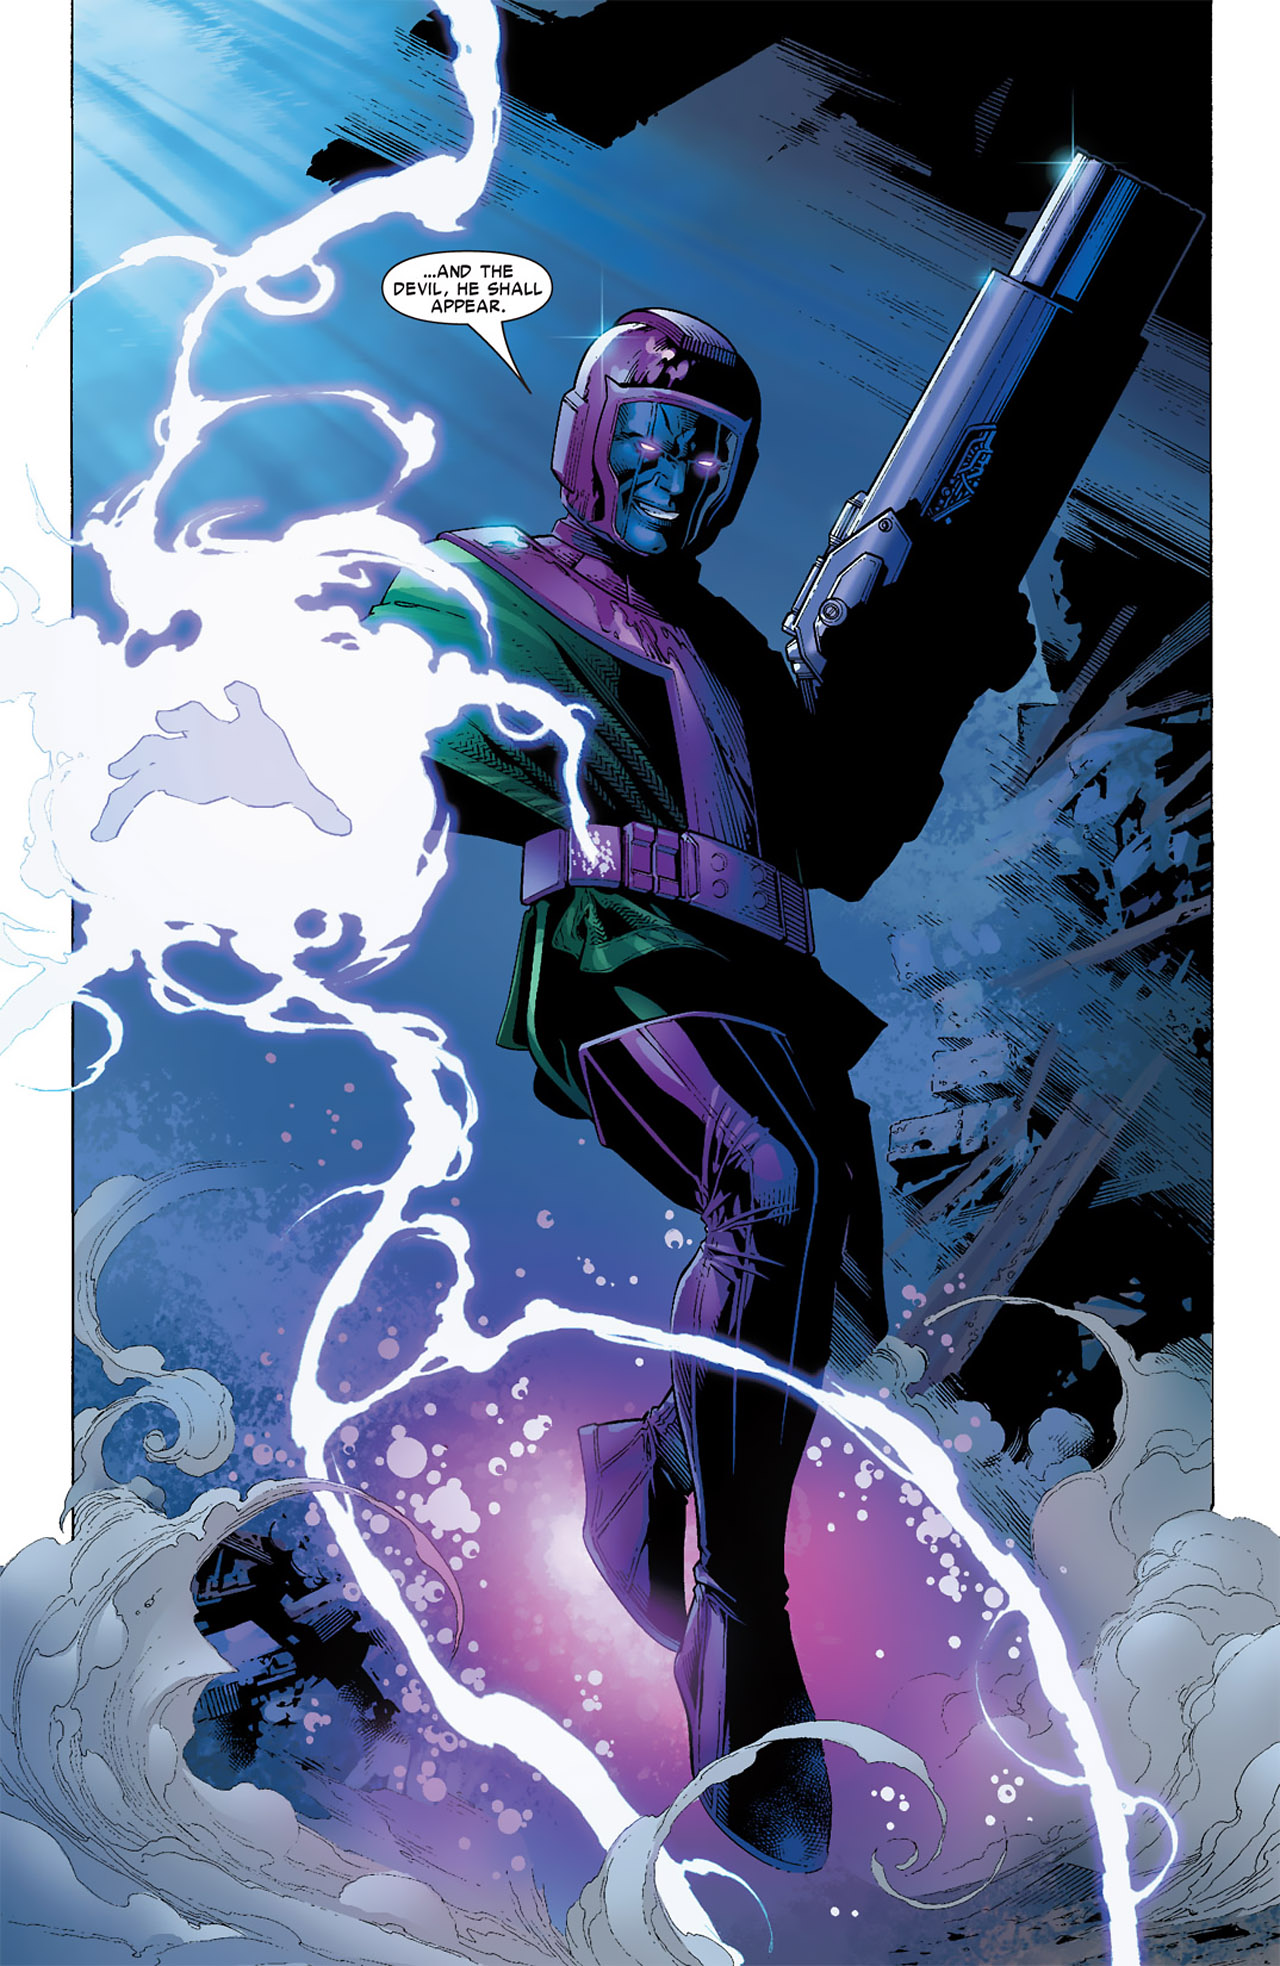 Kang appears before the Young Avengers in Young Avengers Vol. 1 #3 "Sidekicks (Part 3 of 6)" (2005), Marvel Comics. Art by Jim Cheung, John Dell, Justin Ponsor, and Cory Petit.